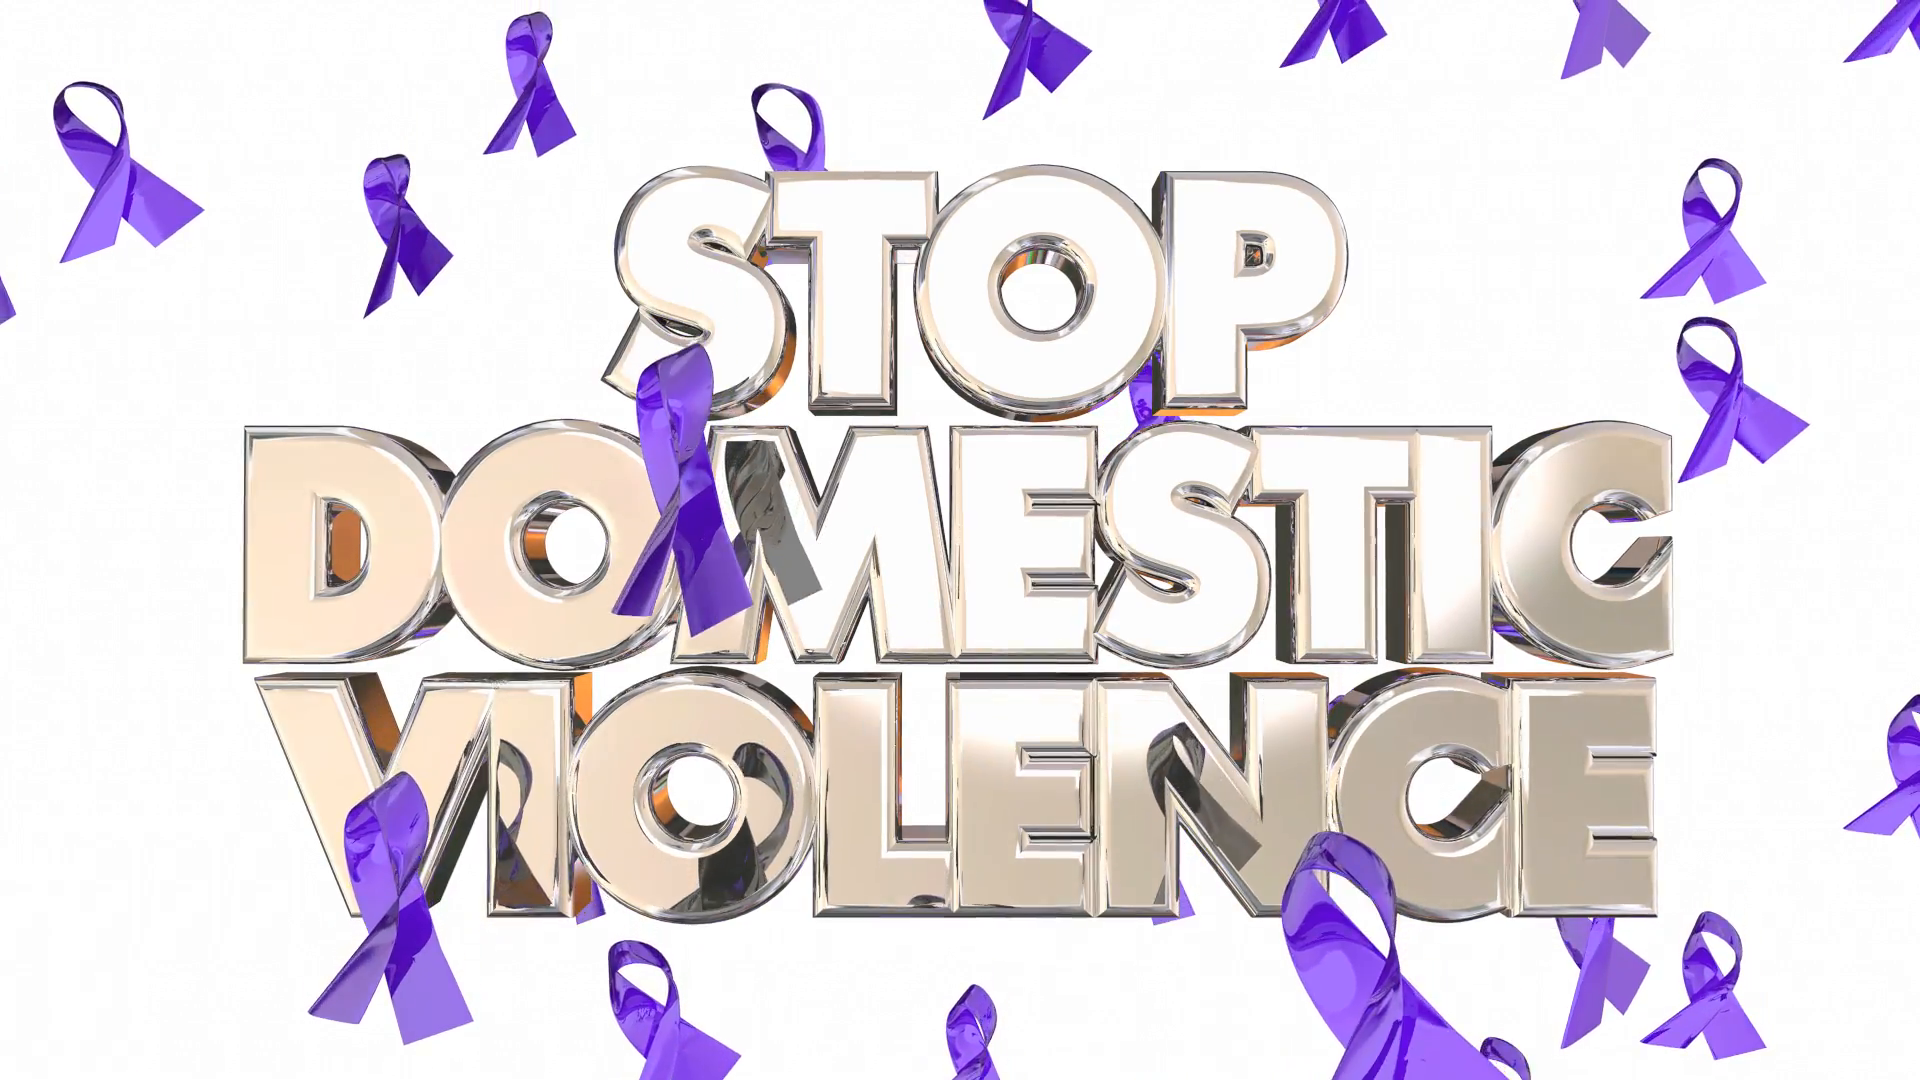 Stop Domestic Violence Awareness Ribbons Prevent Abuse 3D Words Motion Background